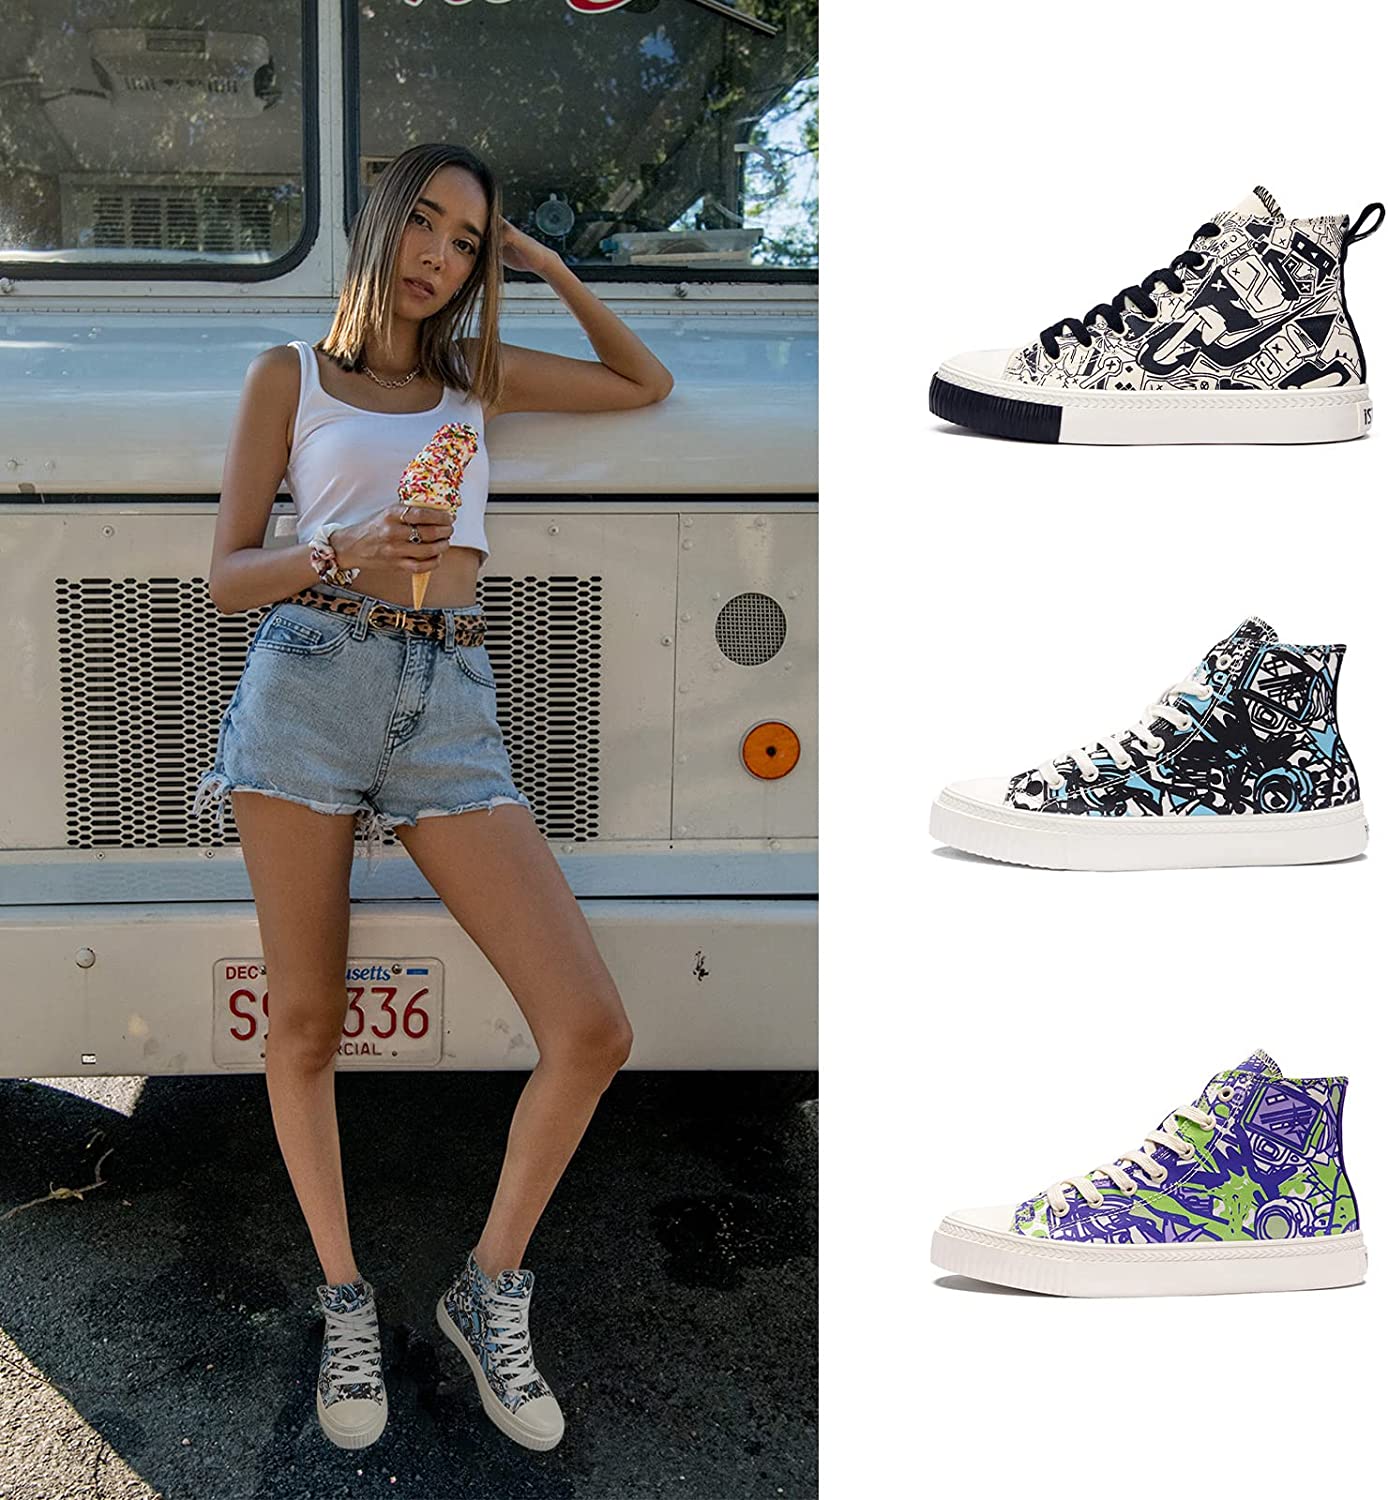 New sz 7 Womens High Top Canvas Sneakers, Lace up Casual Walking Shoes, Women's Fashion Sneakers for Daily Wear.